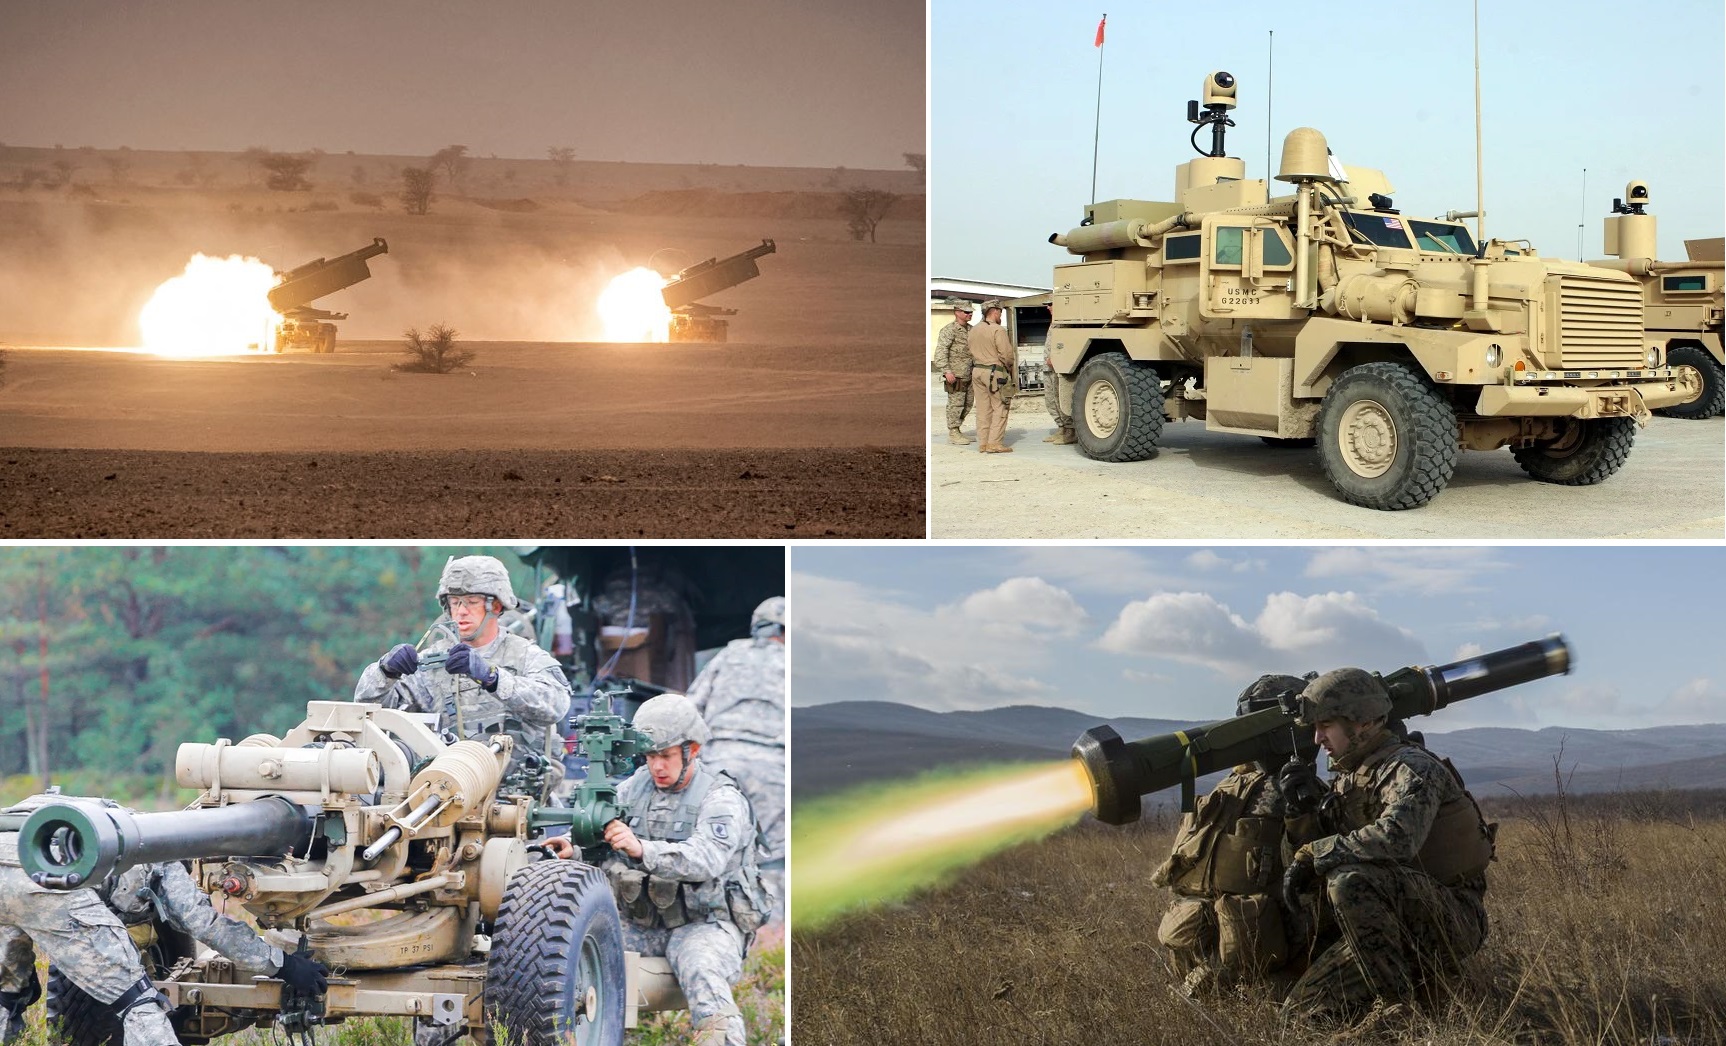 105-mm howitzers, ammunition for HIMARS, Javelin missiles, TOW missile launchers, drones and MRAP vehicles - details of the $775,000,000 military aid package for Ukraine have been released